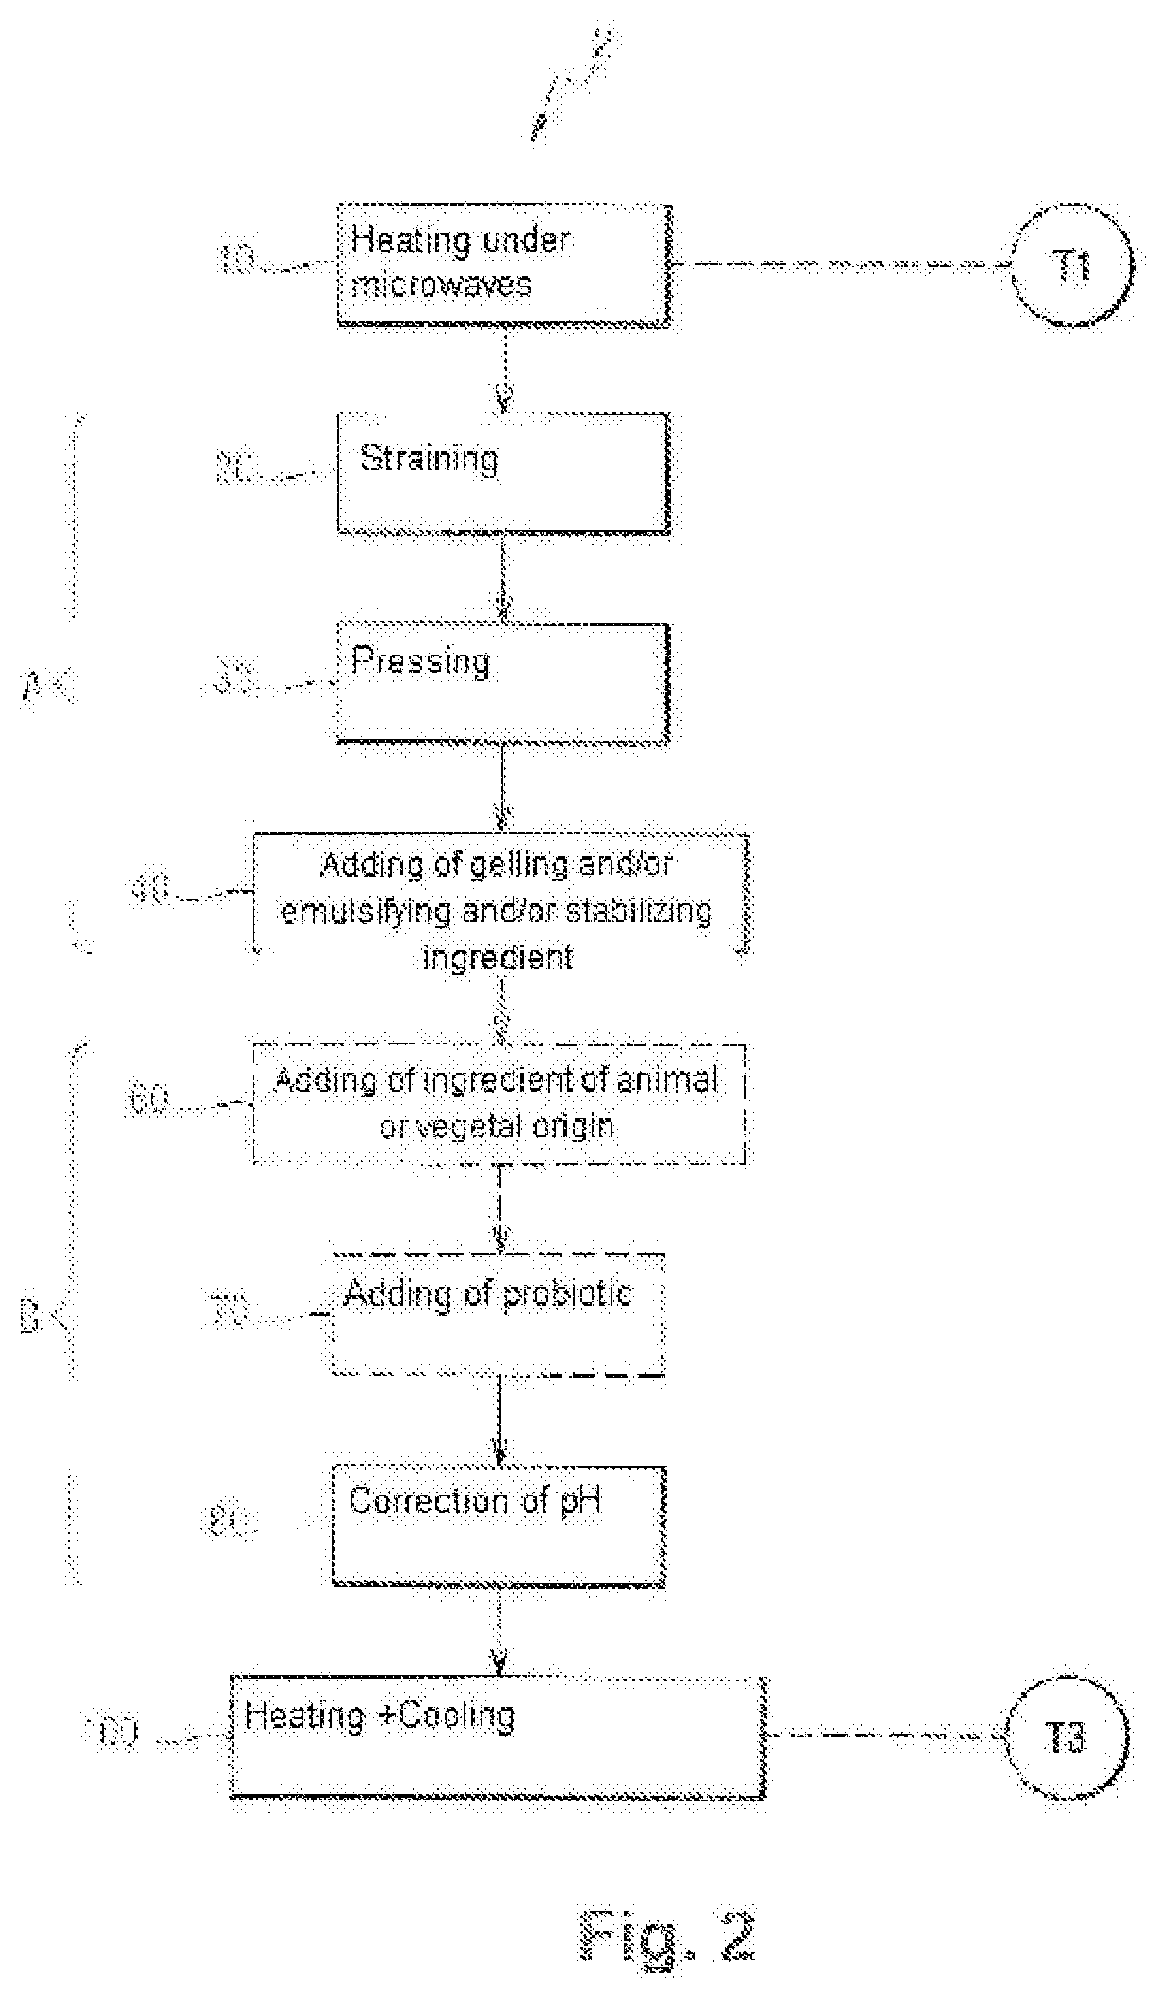 Method for producing food products from yoghurt